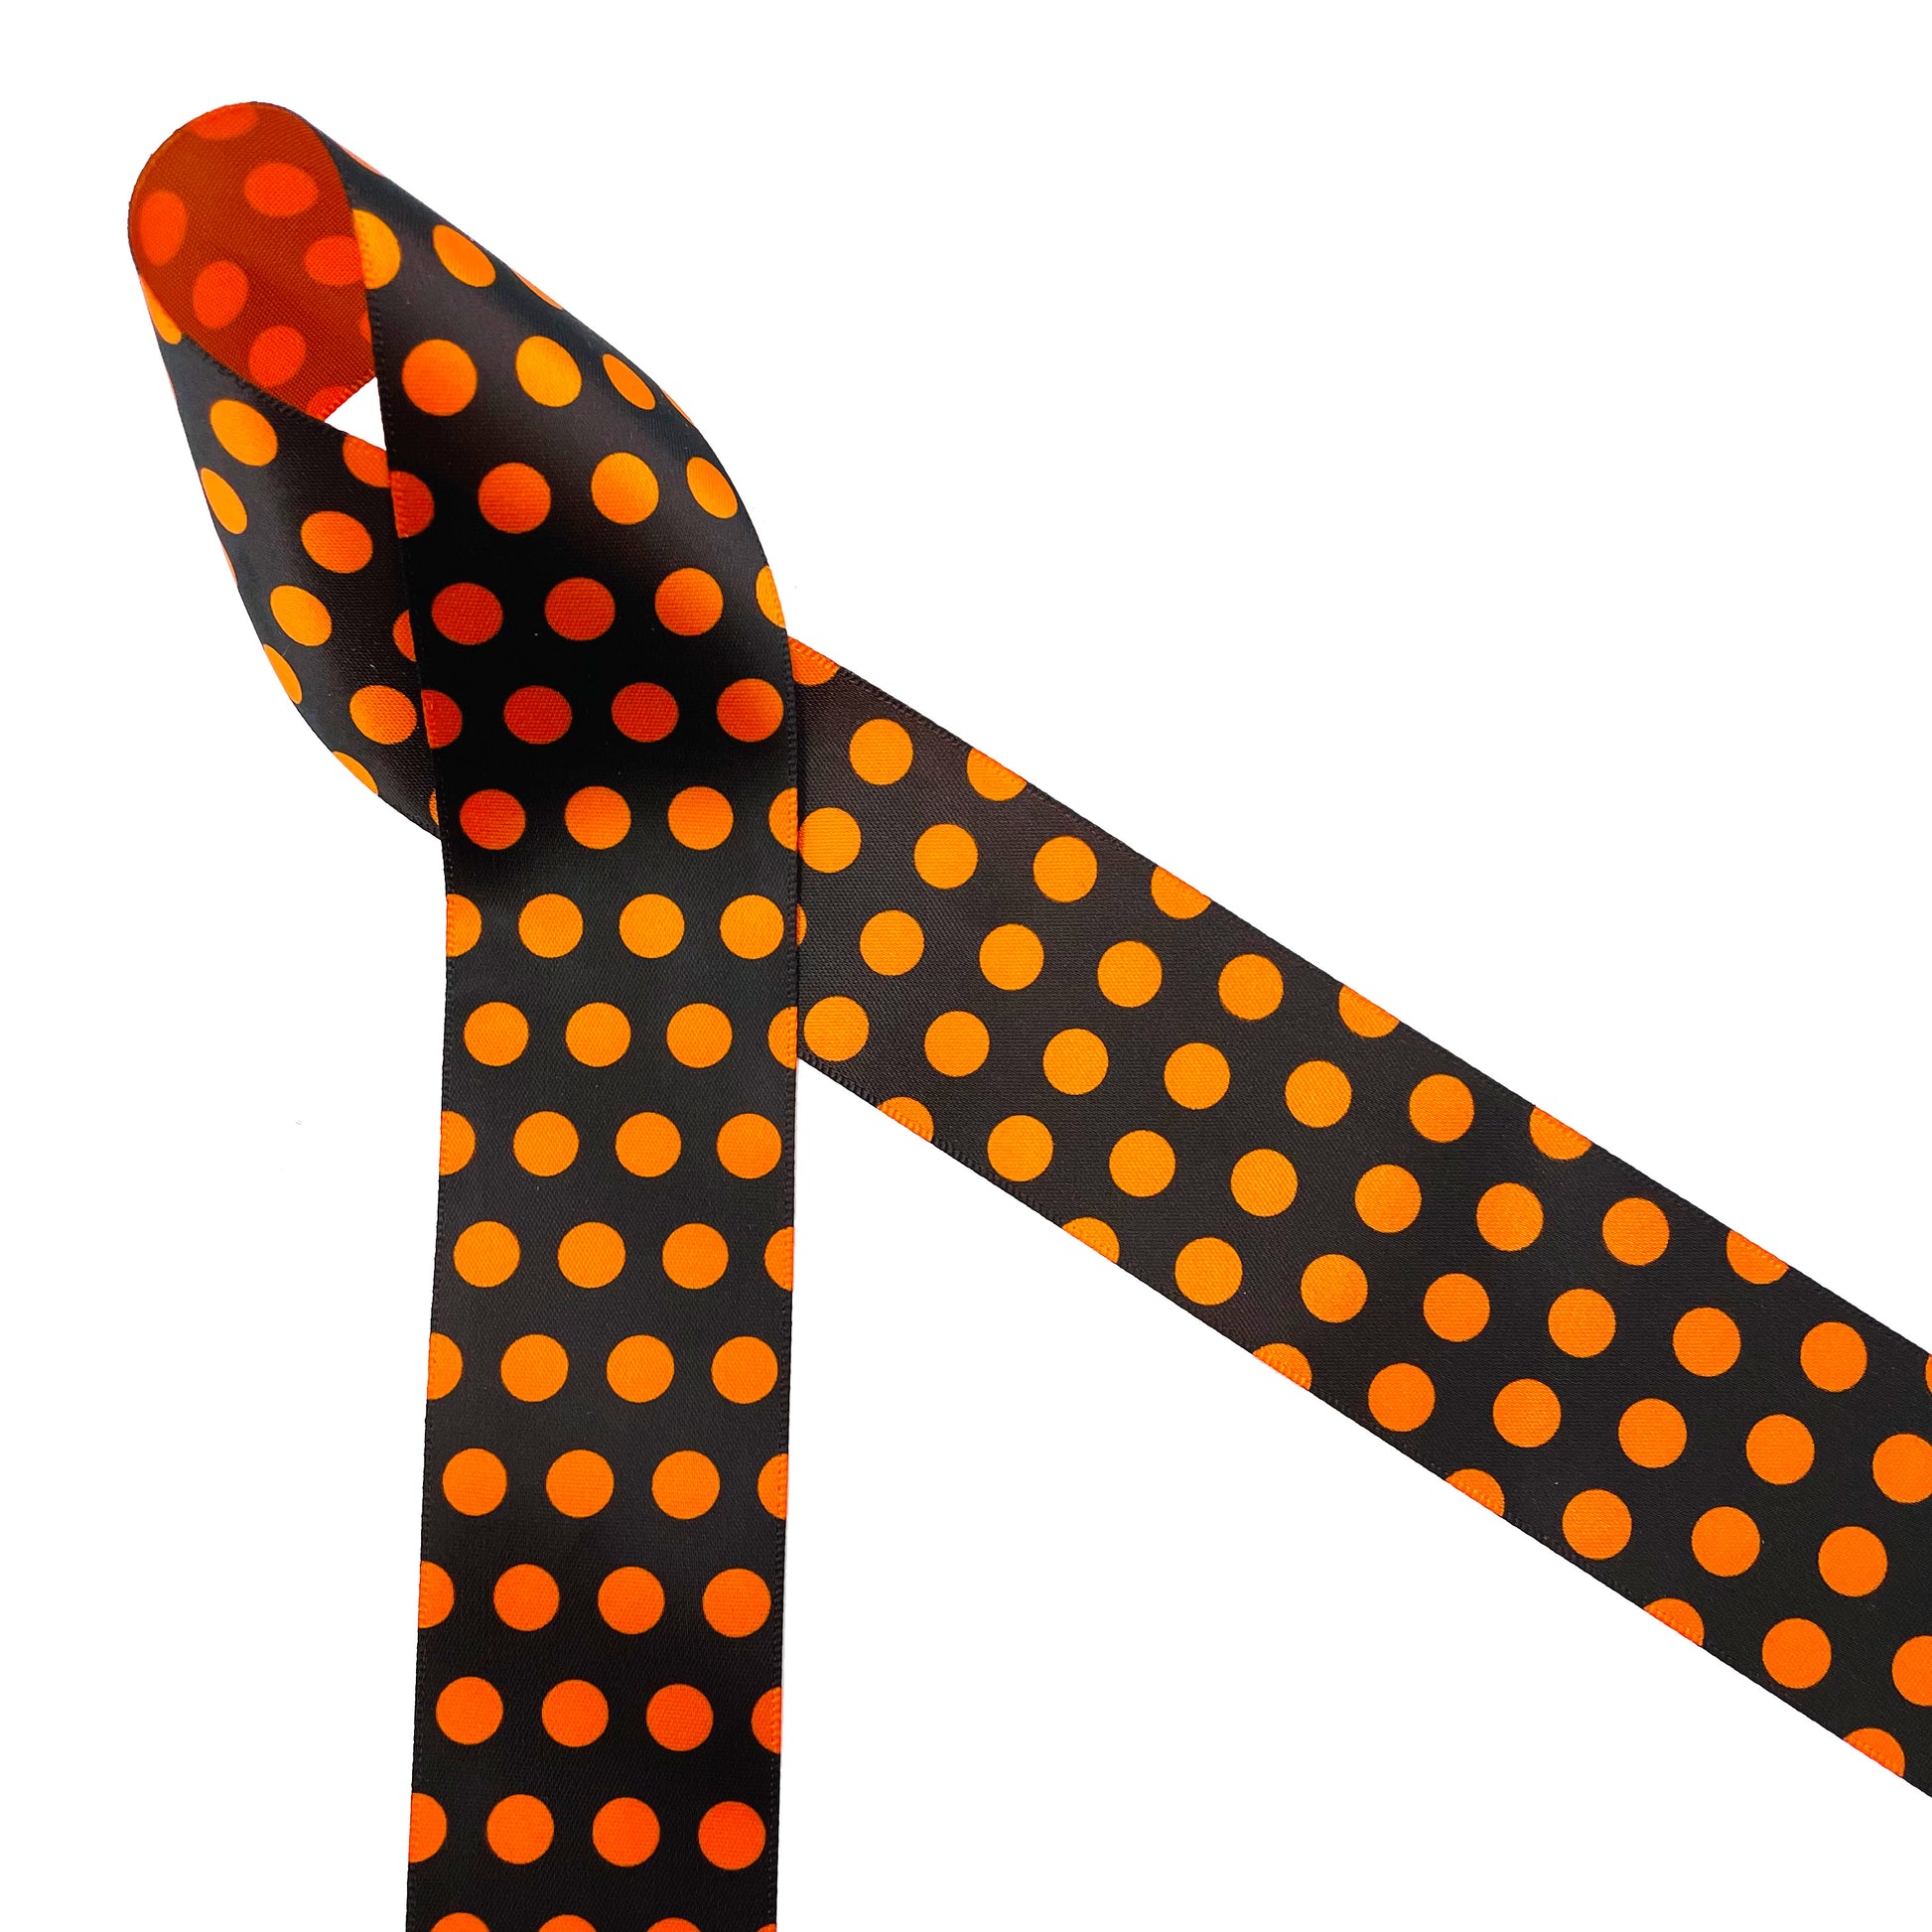 Nothing says Halloween like black and orange dots! Orange polka dots on a black background printed on 7/8" orange satin ribbon is a Halloween tradition. This Halloween classic design is ideal for party decor, party favors, gift wrap, gift baskets, treat bags, candy shops, bakeries, cookies and cake pops! This is a great design for Halloween crafts, wreaths, sewing and quilting projects. All our ribbon is designed and printed in the USA